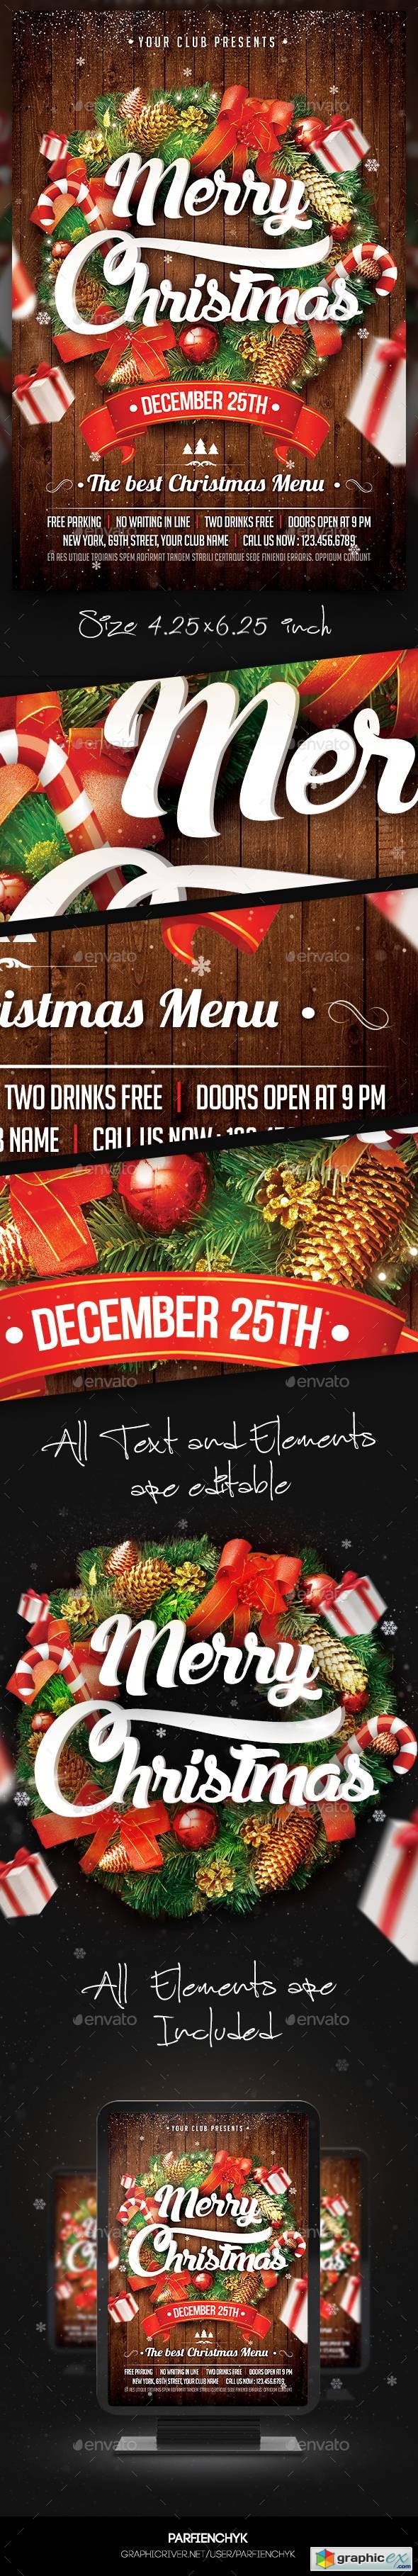 Christmas Party Flyer Template 13746216